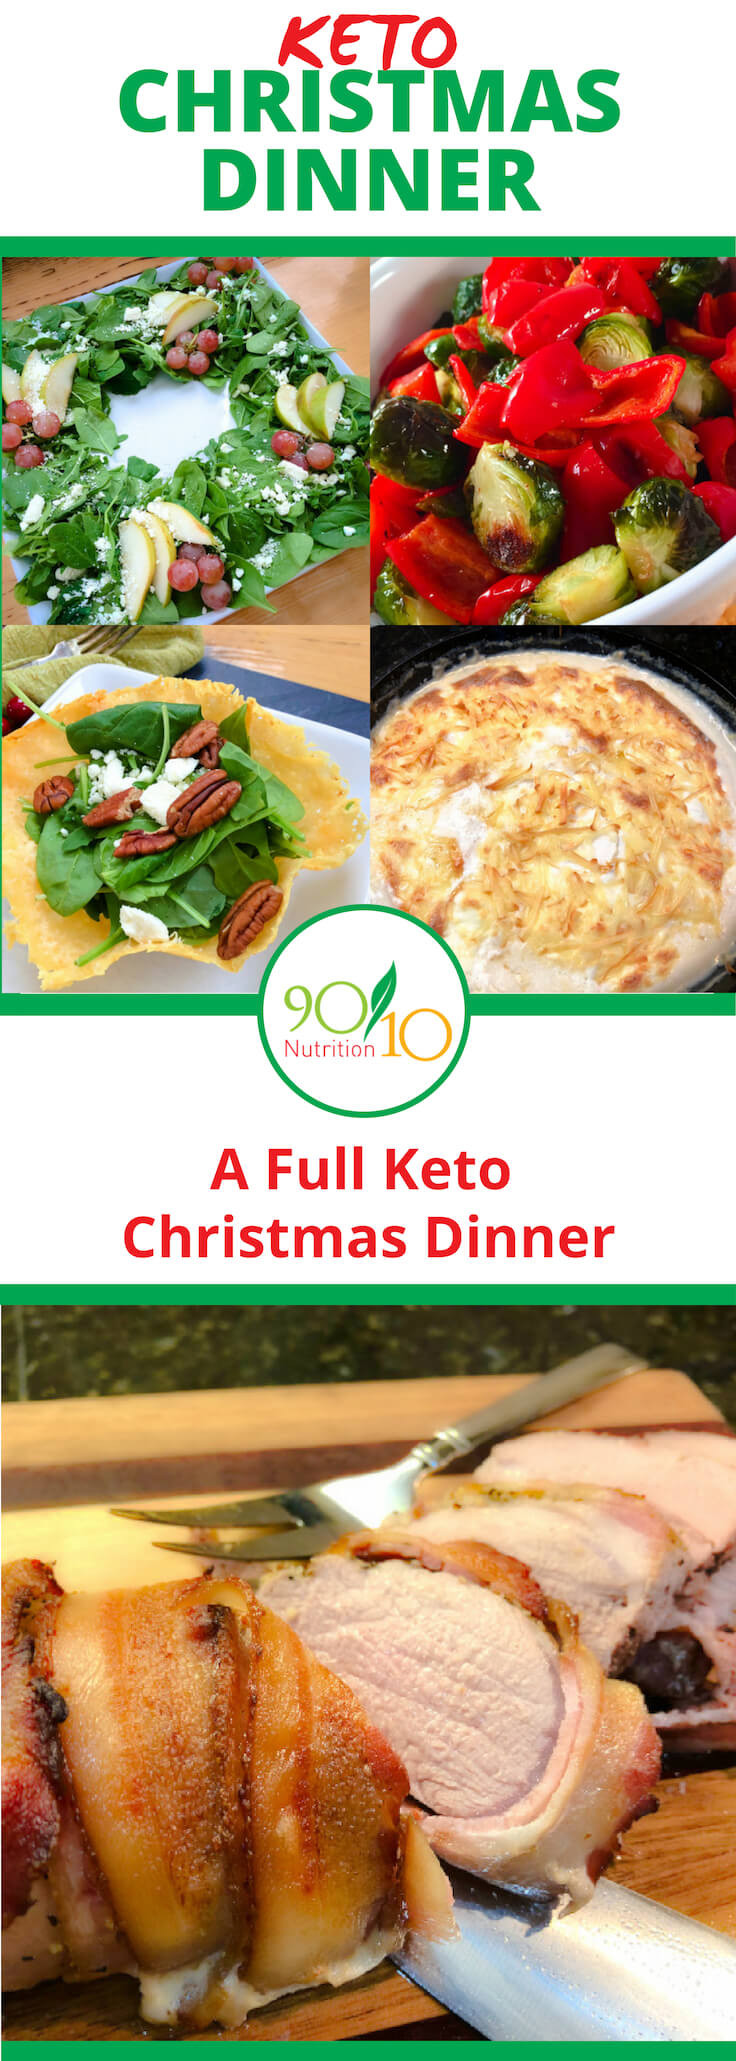 Keto Christmas Dinner
 Keto Christmas Dinner Menu Clean Eating 90 10 Nutrition